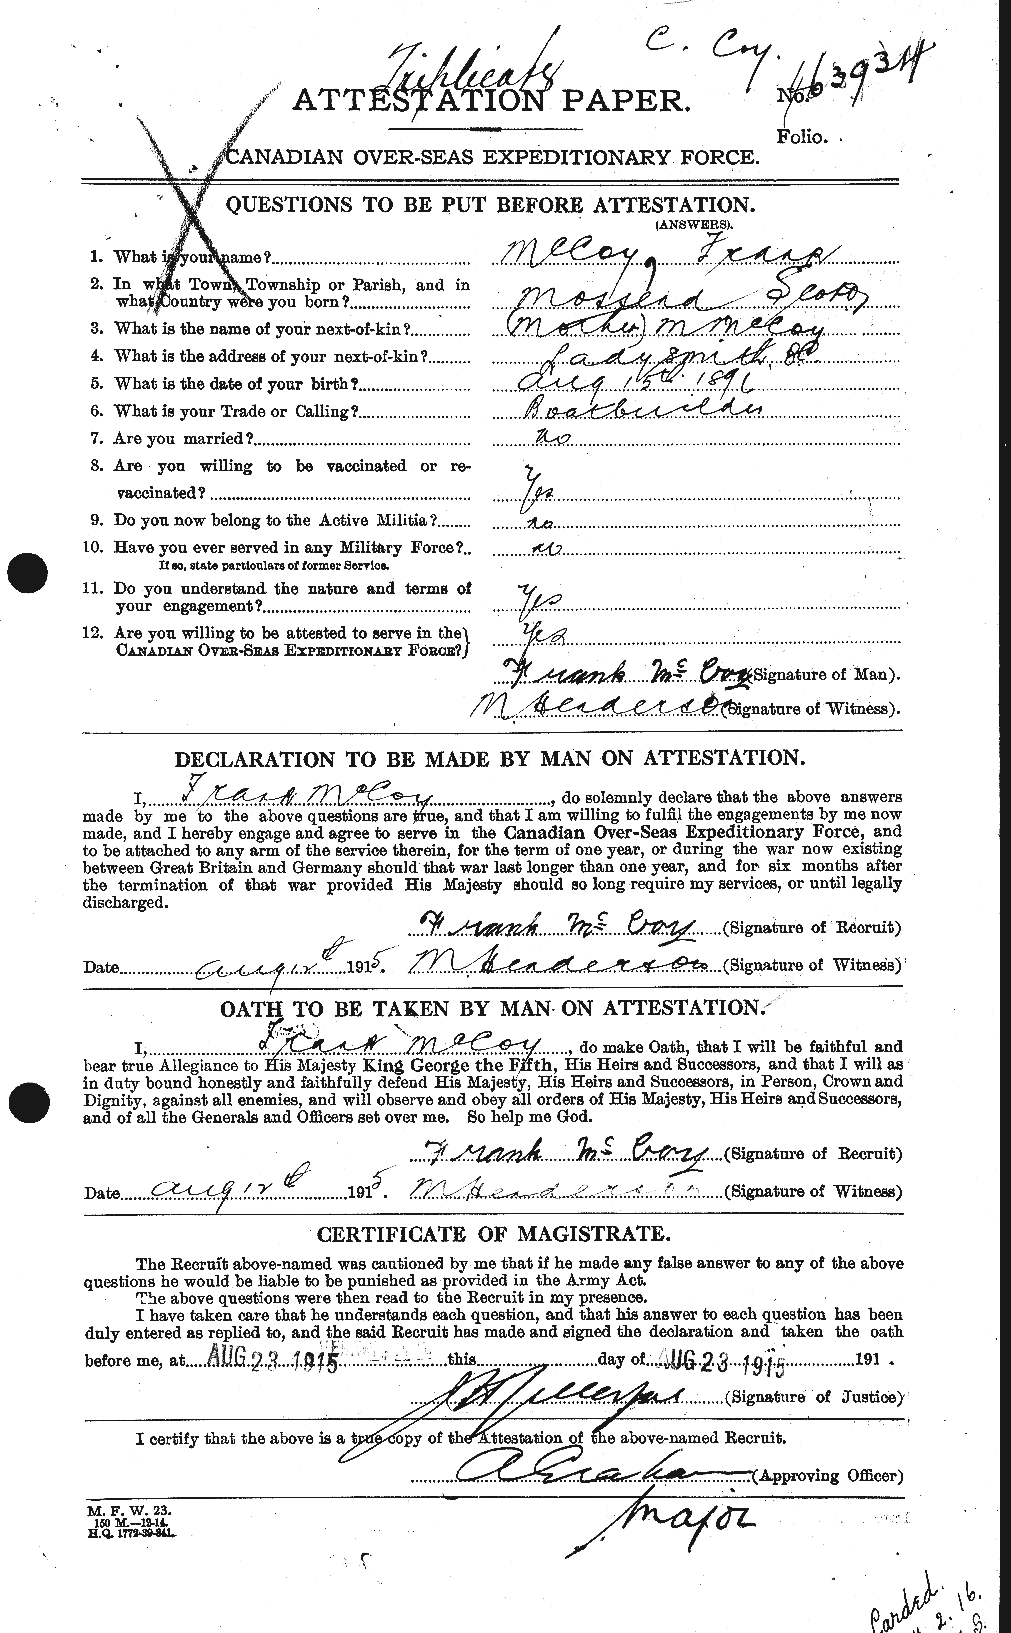 Personnel Records of the First World War - CEF 134860a